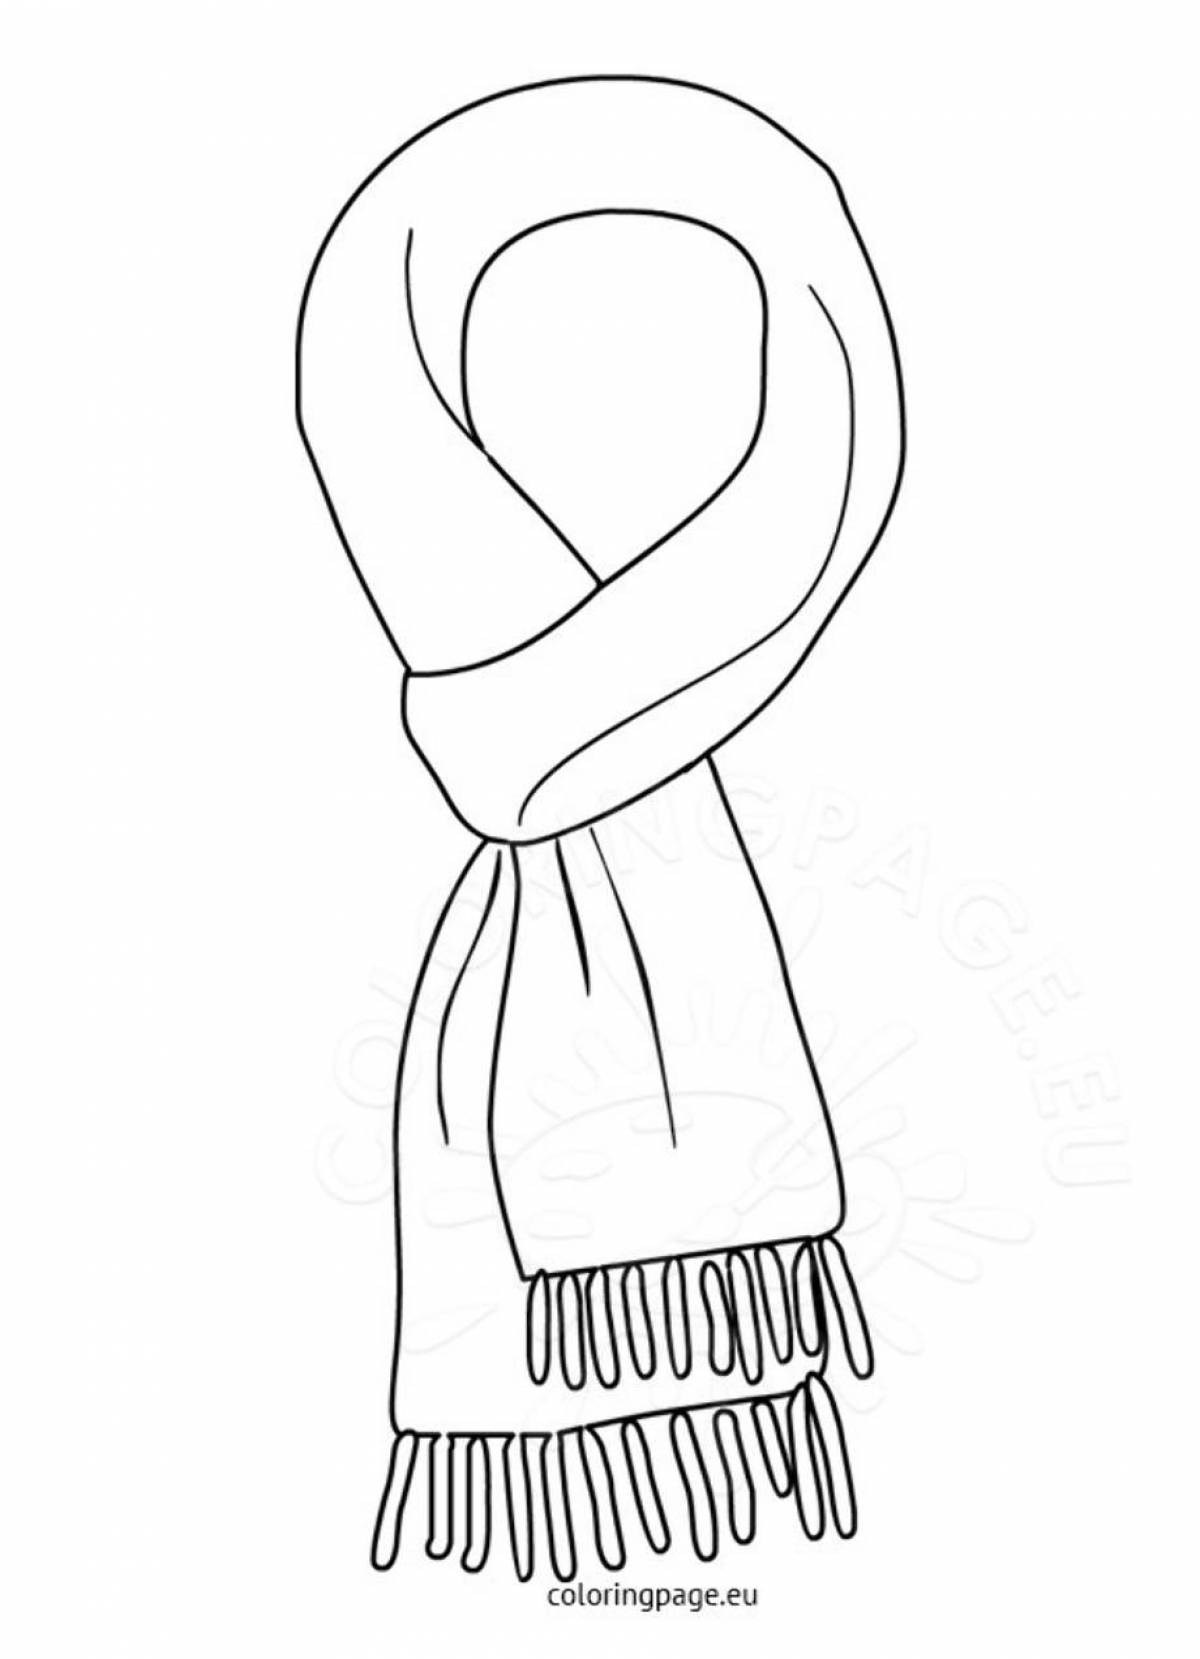 Adorable scarf coloring page for kids